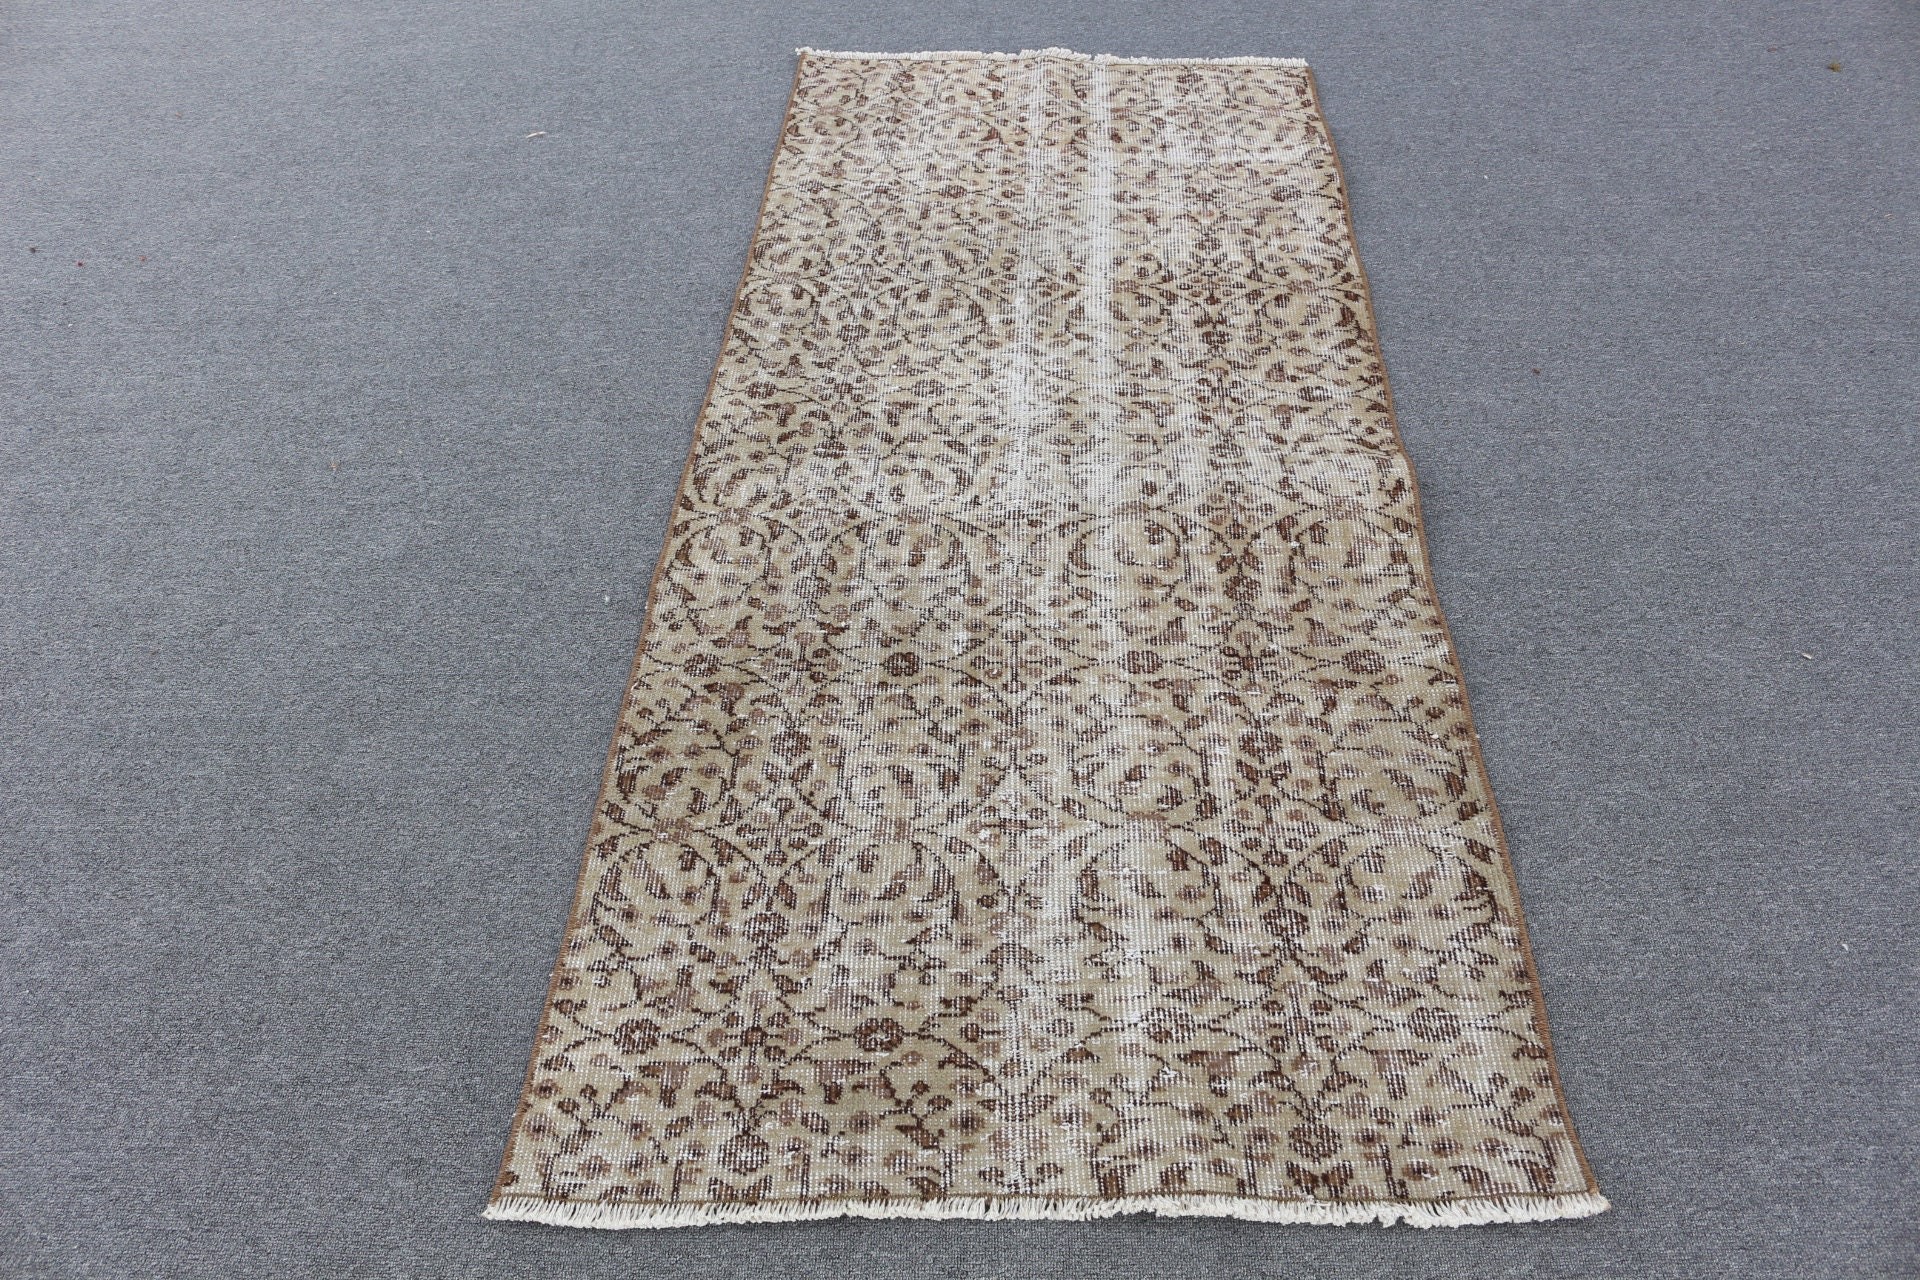 Turkish Rugs, Moroccan Rug, Kitchen Rugs, Nursery Rug, Rugs for Entry, Beige Cool Rugs, 2.7x6 ft Accent Rugs, Vintage Rugs